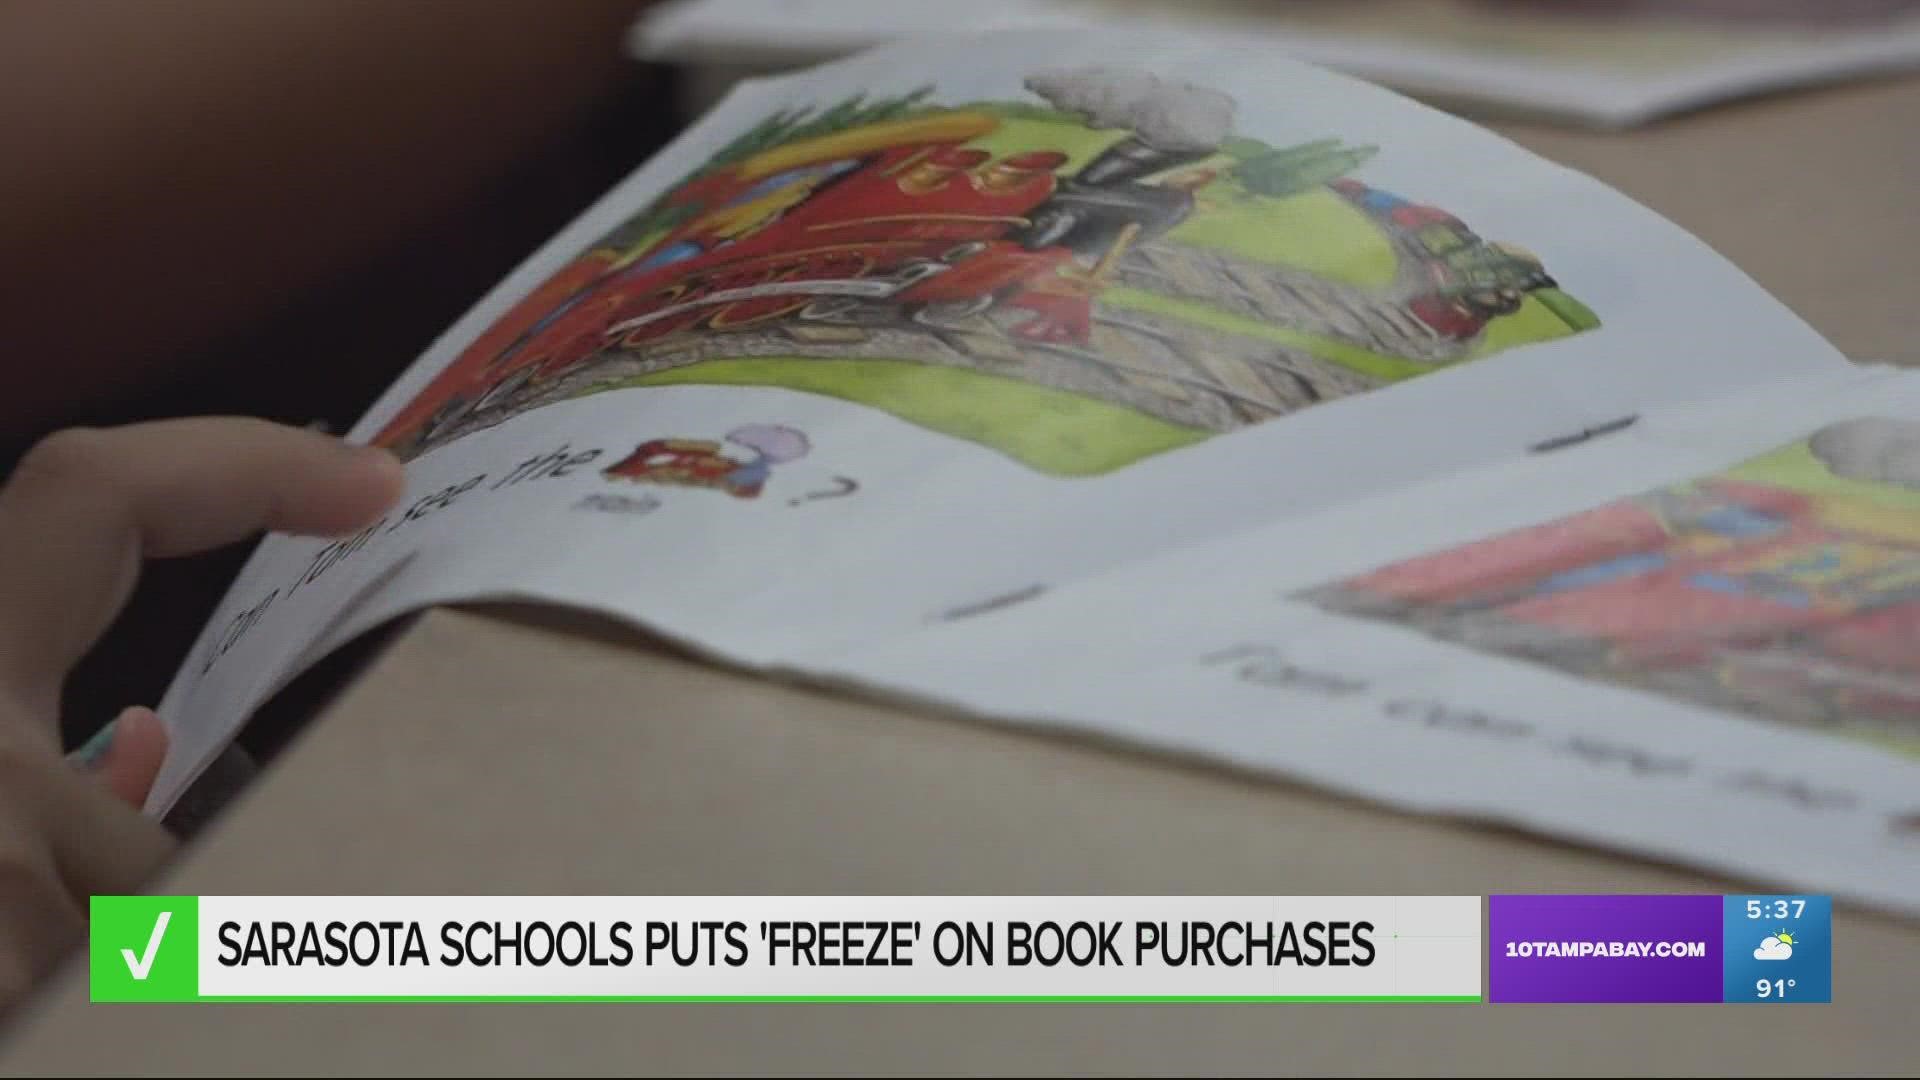 Book fairs are also on hold as the district waits for further guidance from the Florida Department of Education, a spokesperson said.